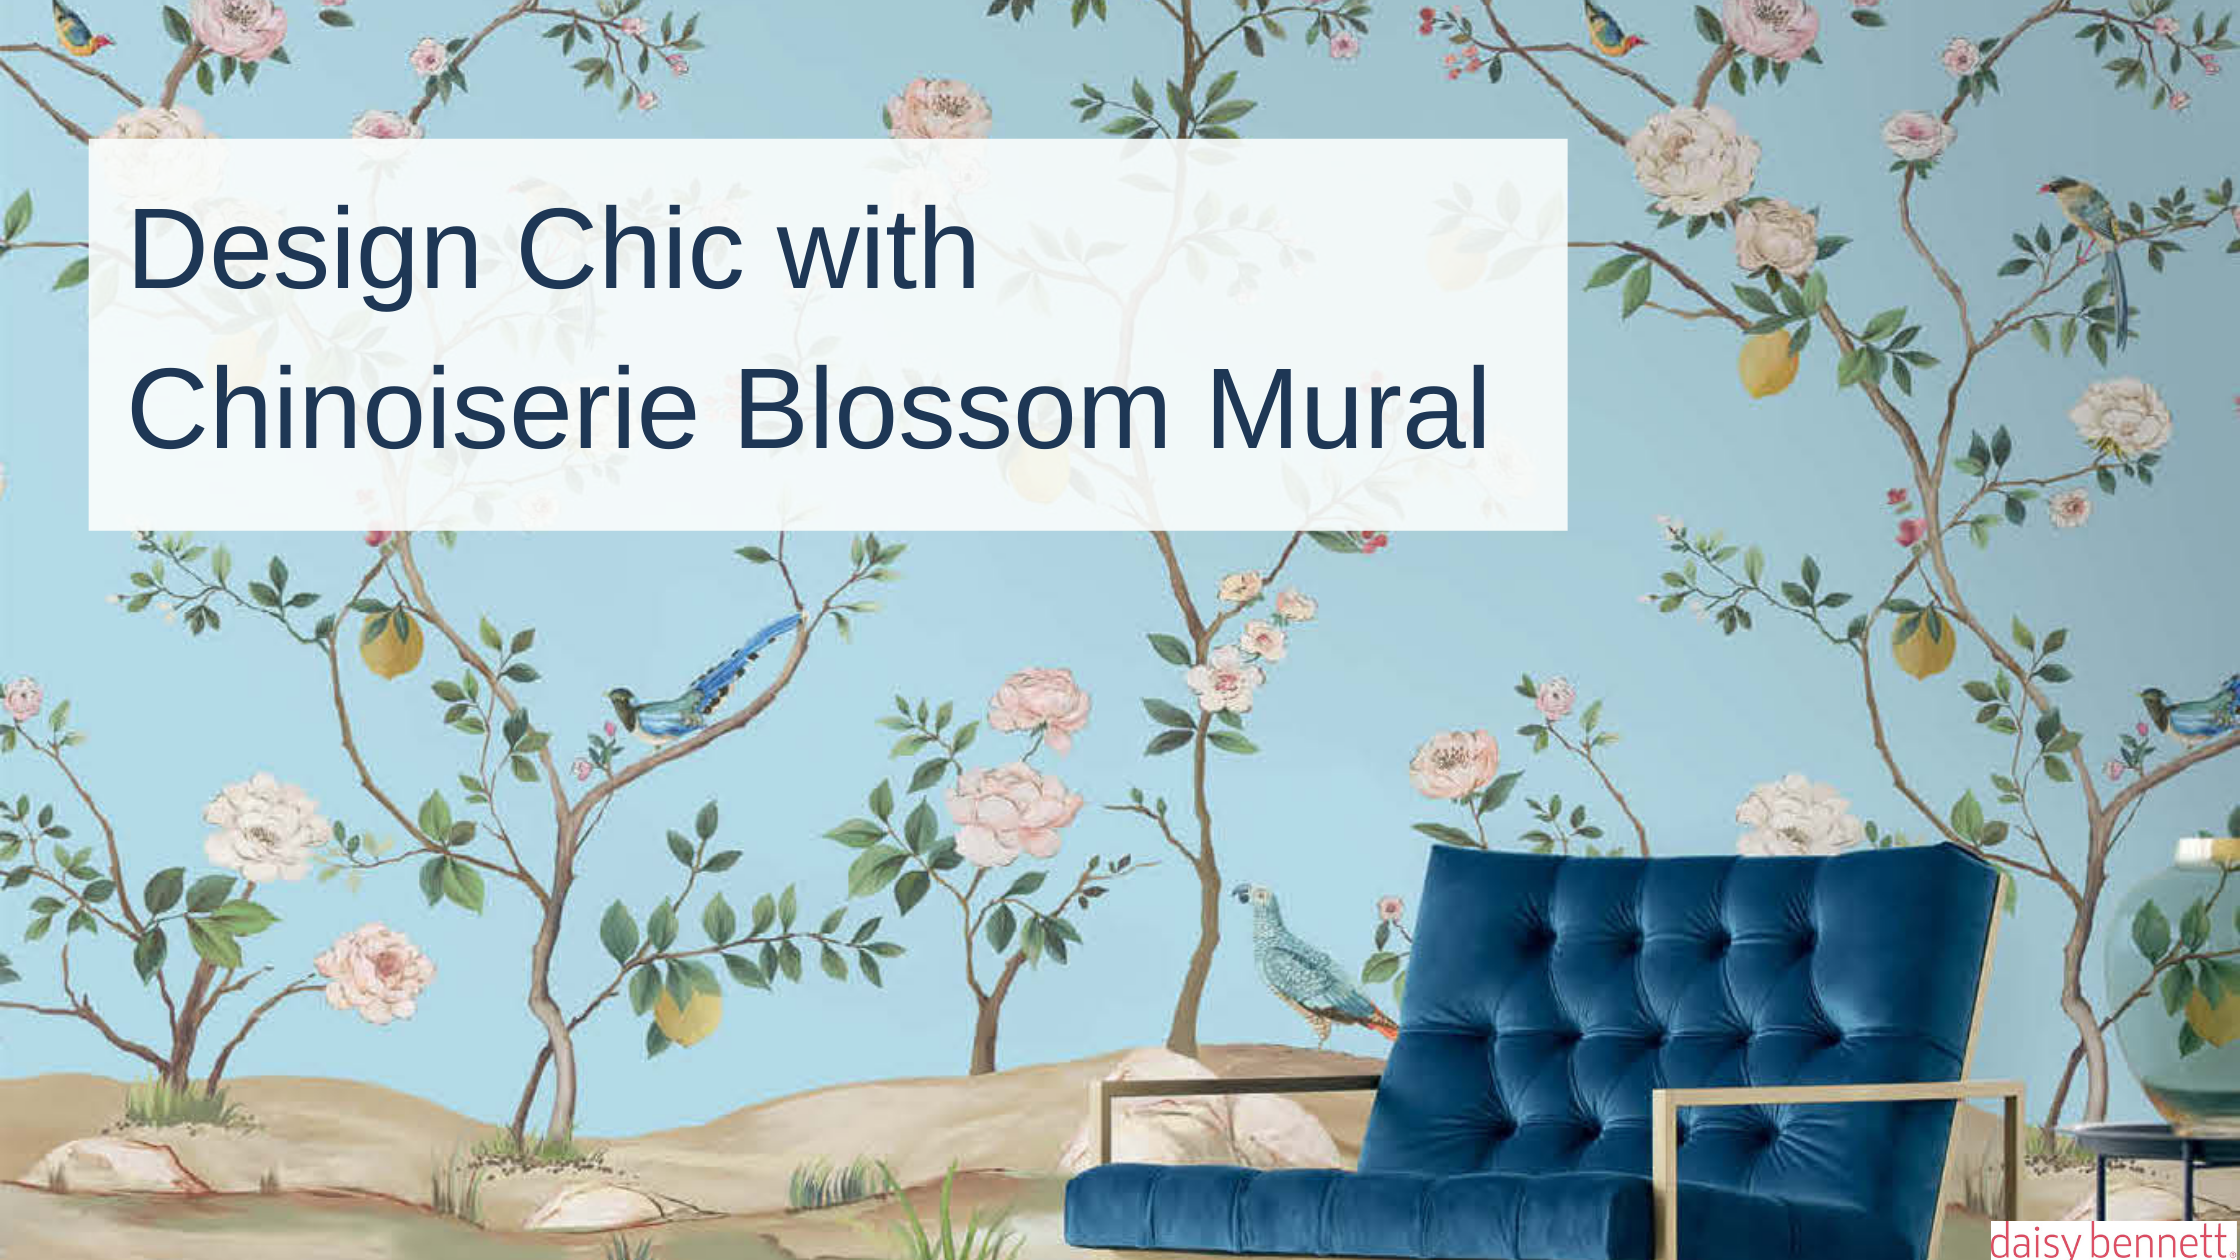 Chinoiserie design a history of the pattern and design tips